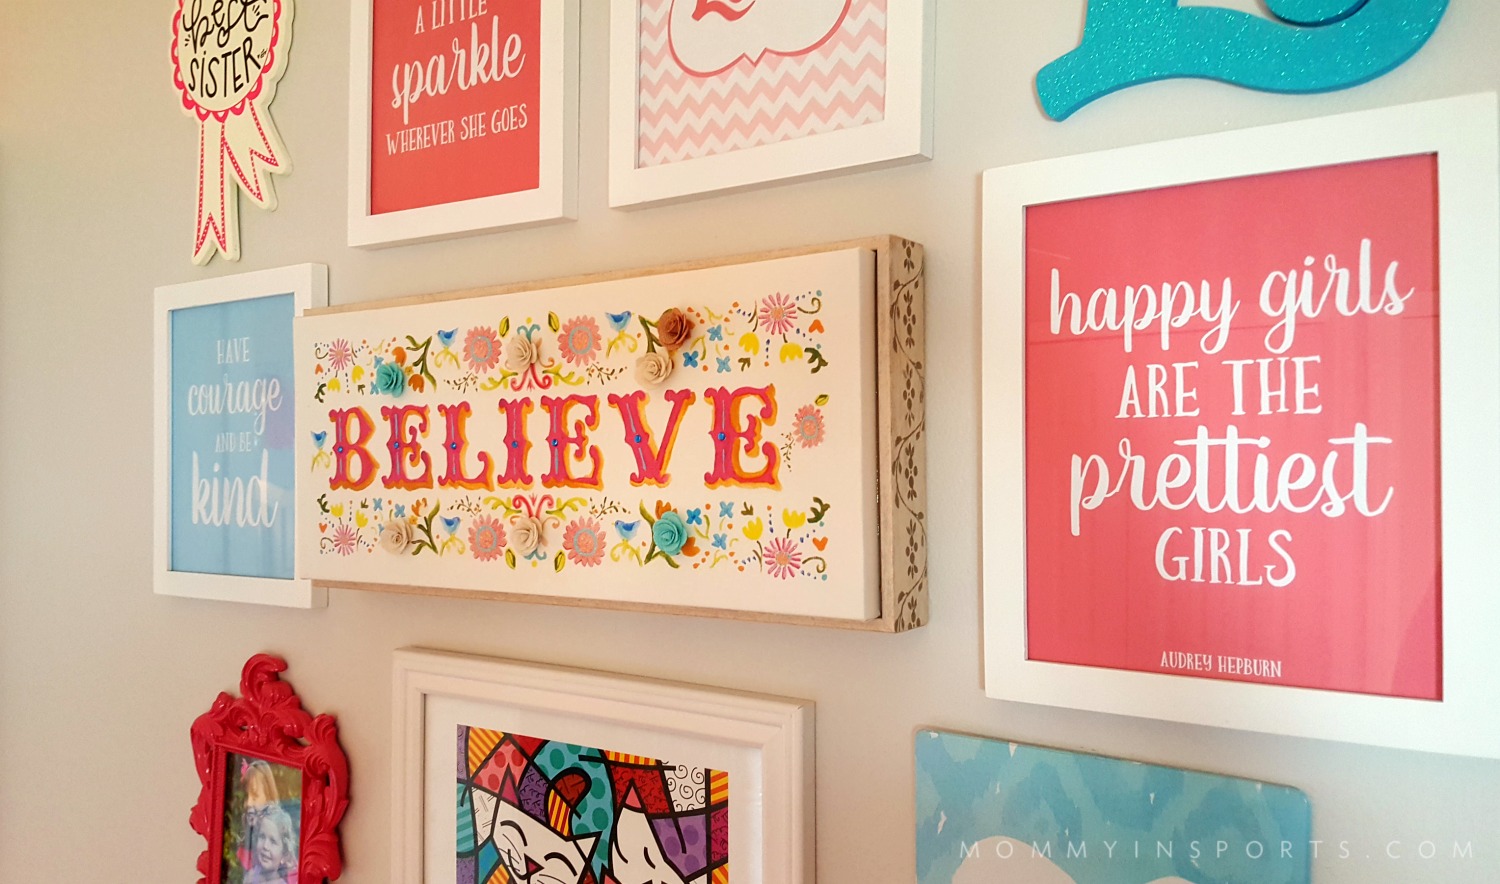 Is your daughter looking for a big girl room? Try this girl boss makeover with FREE quote printables! Perfect to inspire your budding tween!